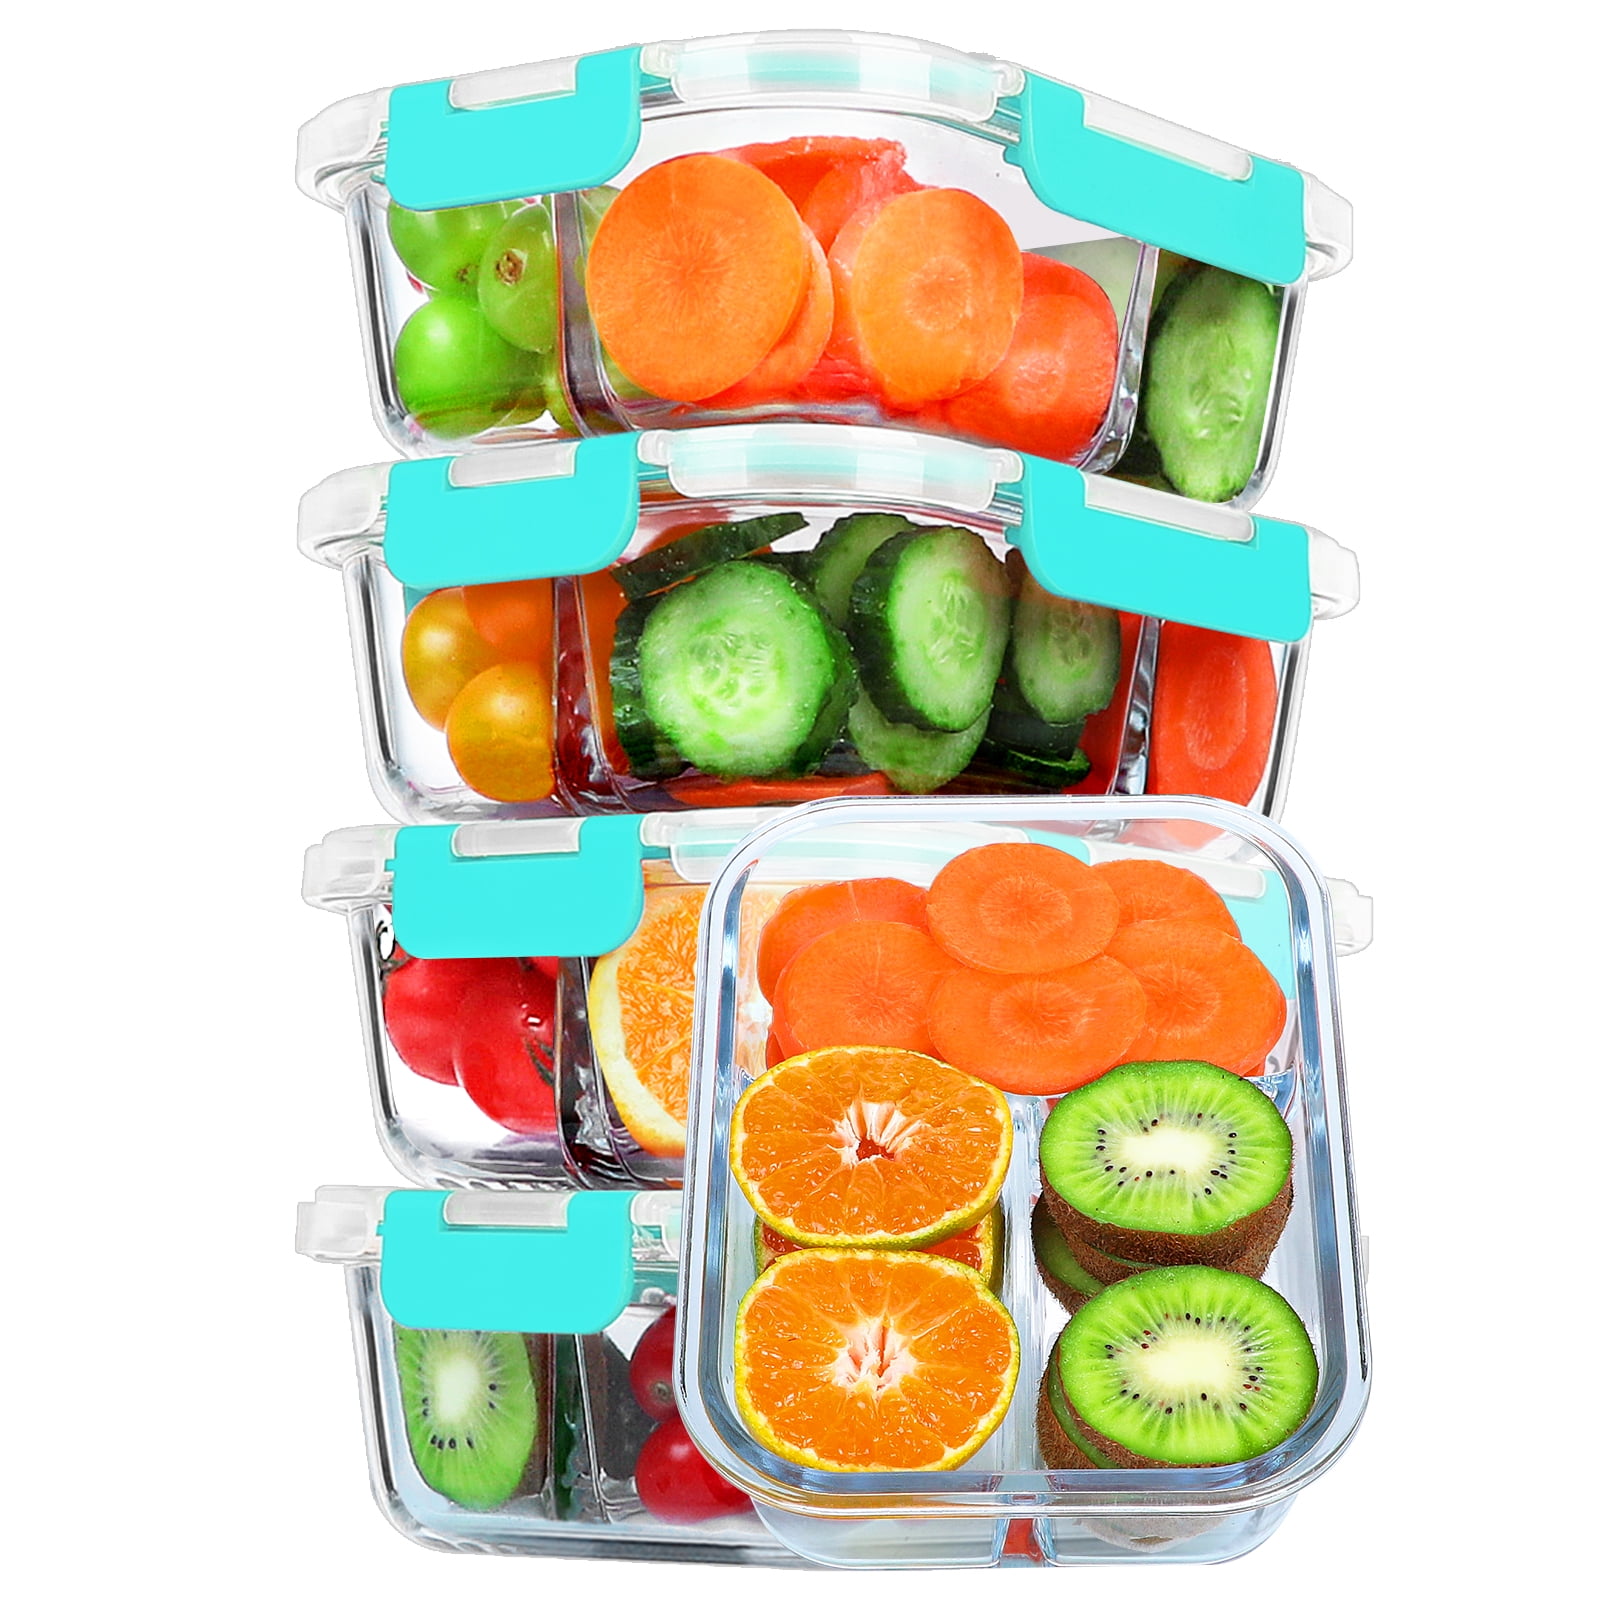 5-Pack, 36 Oz]Glass Meal Prep Containers 3 Compartment with Lids, BPA-Free Food  Storage Glass Lunch Containers Bento Box for Microwave, Oven, Freezer,  Dishwasher 